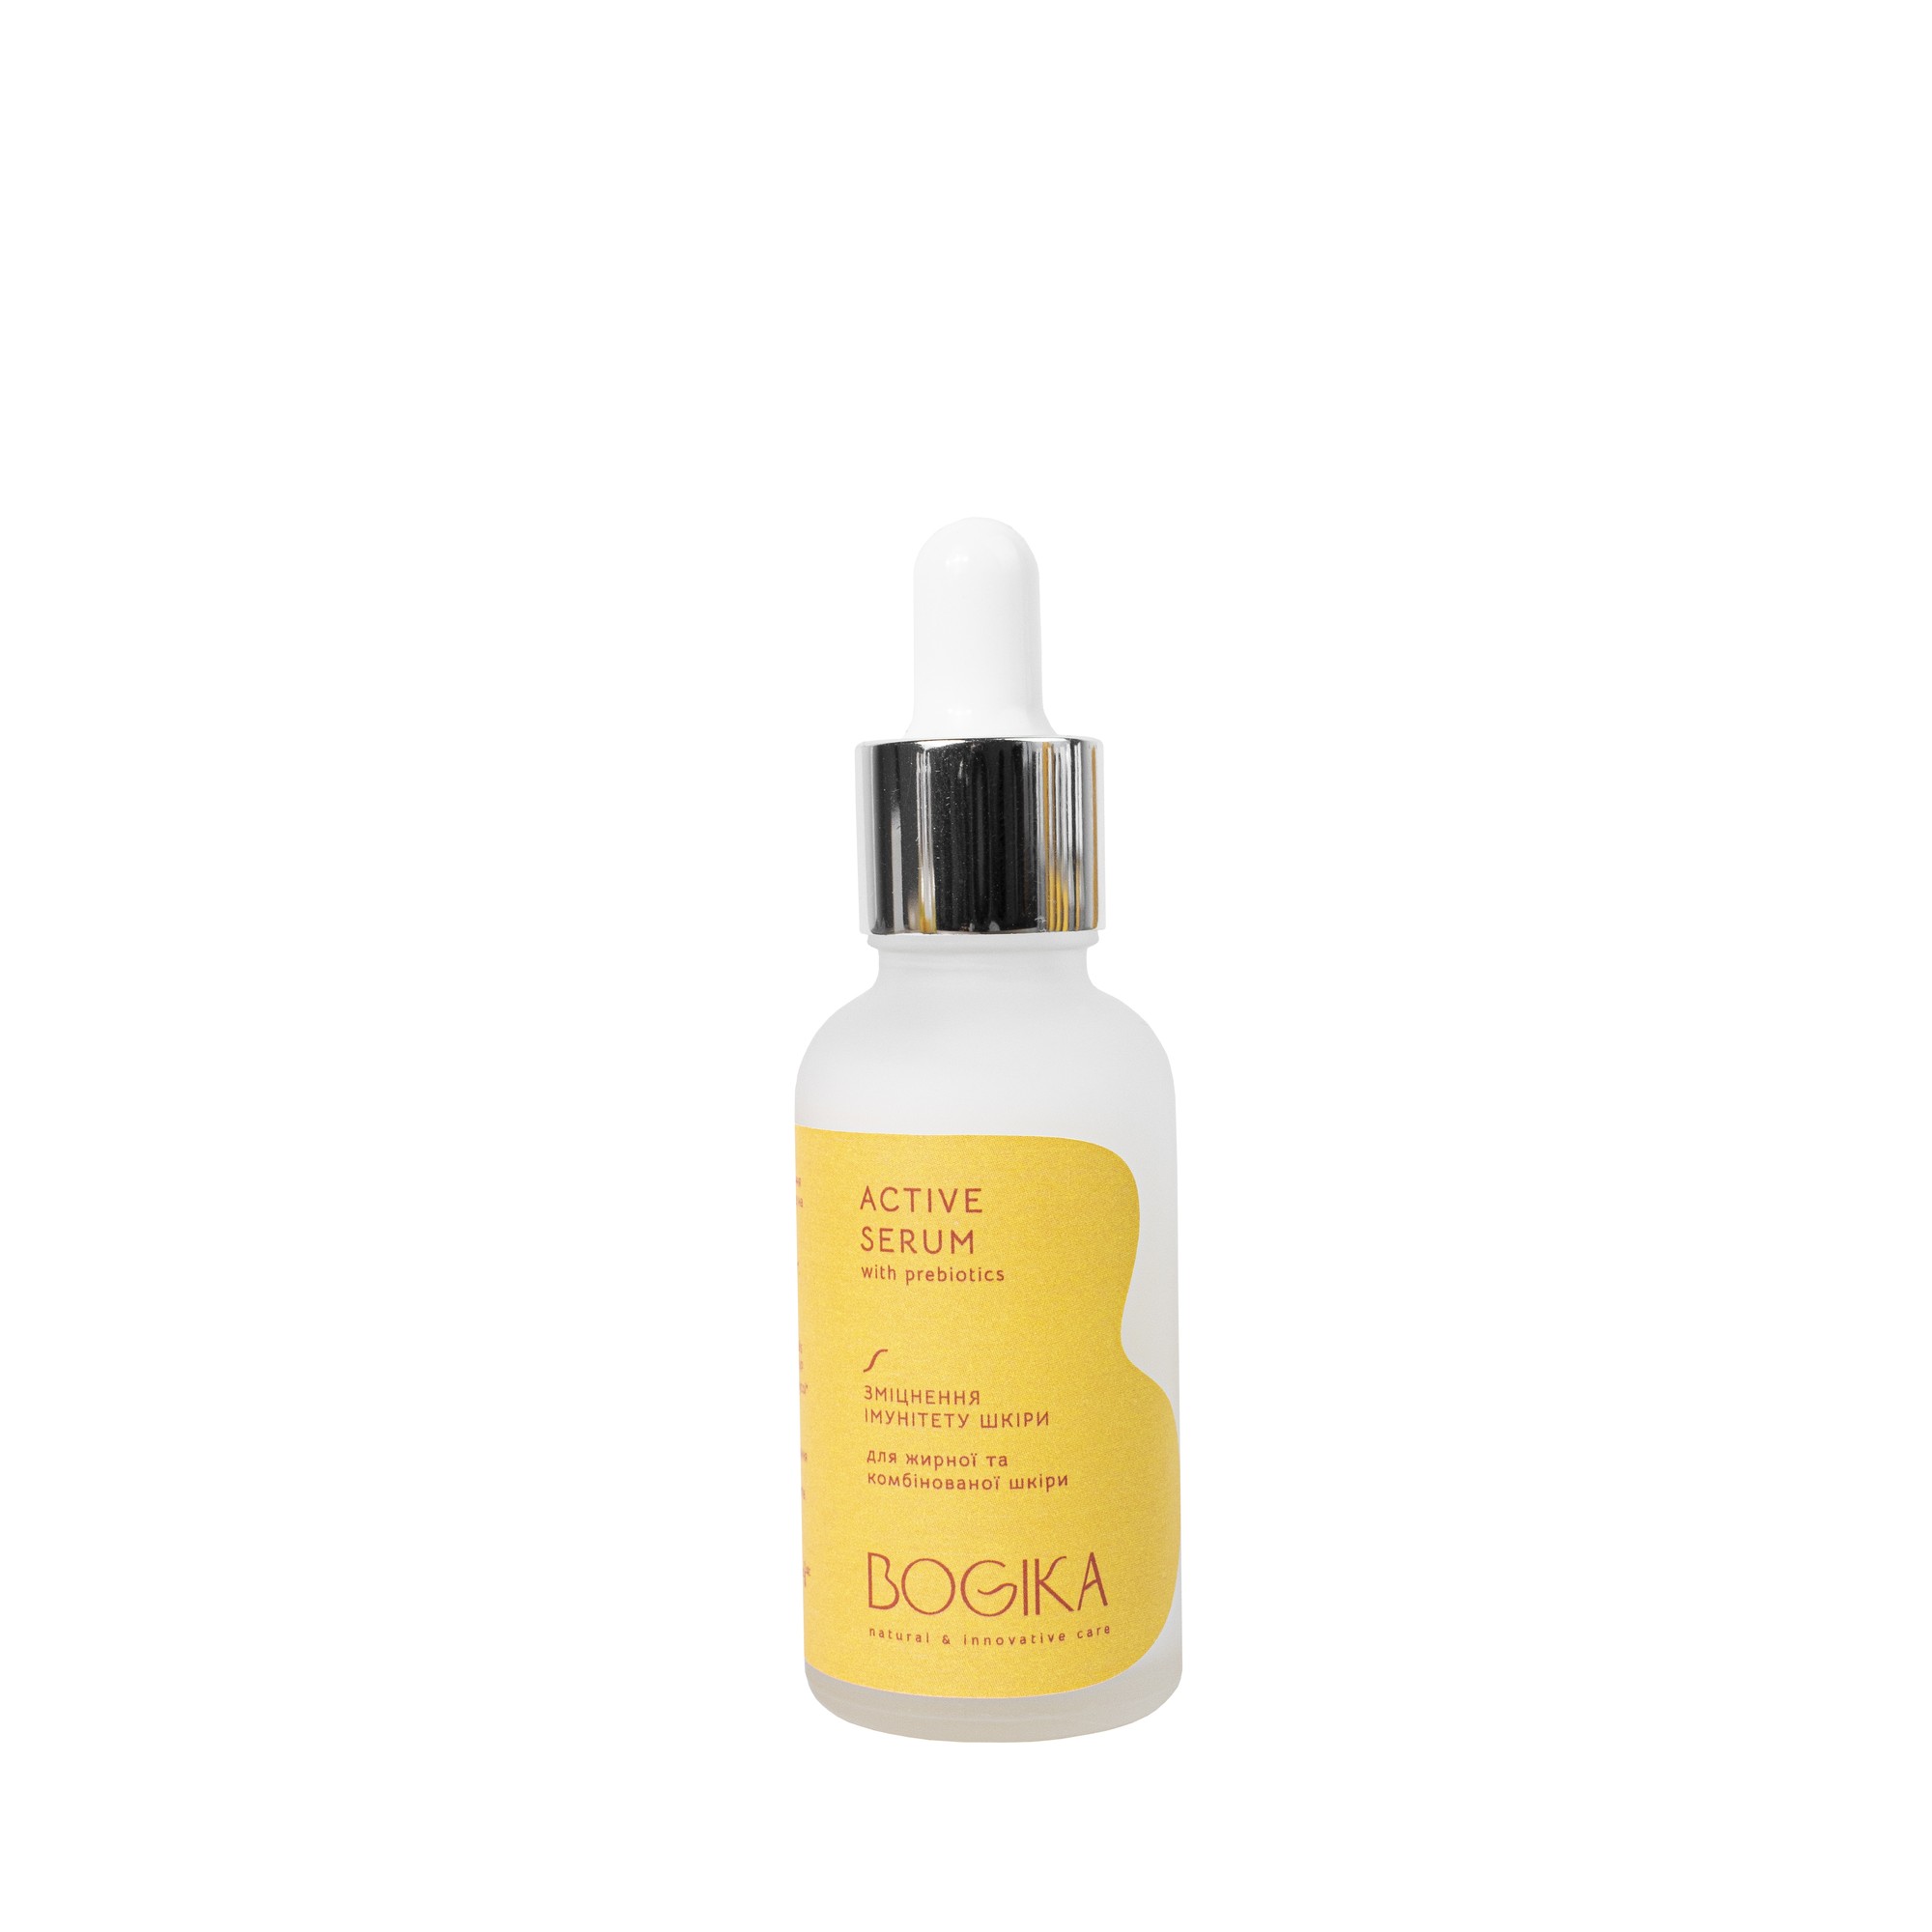 Active serum 30 ml for oily and combination skin with probiotics and magnolia extract